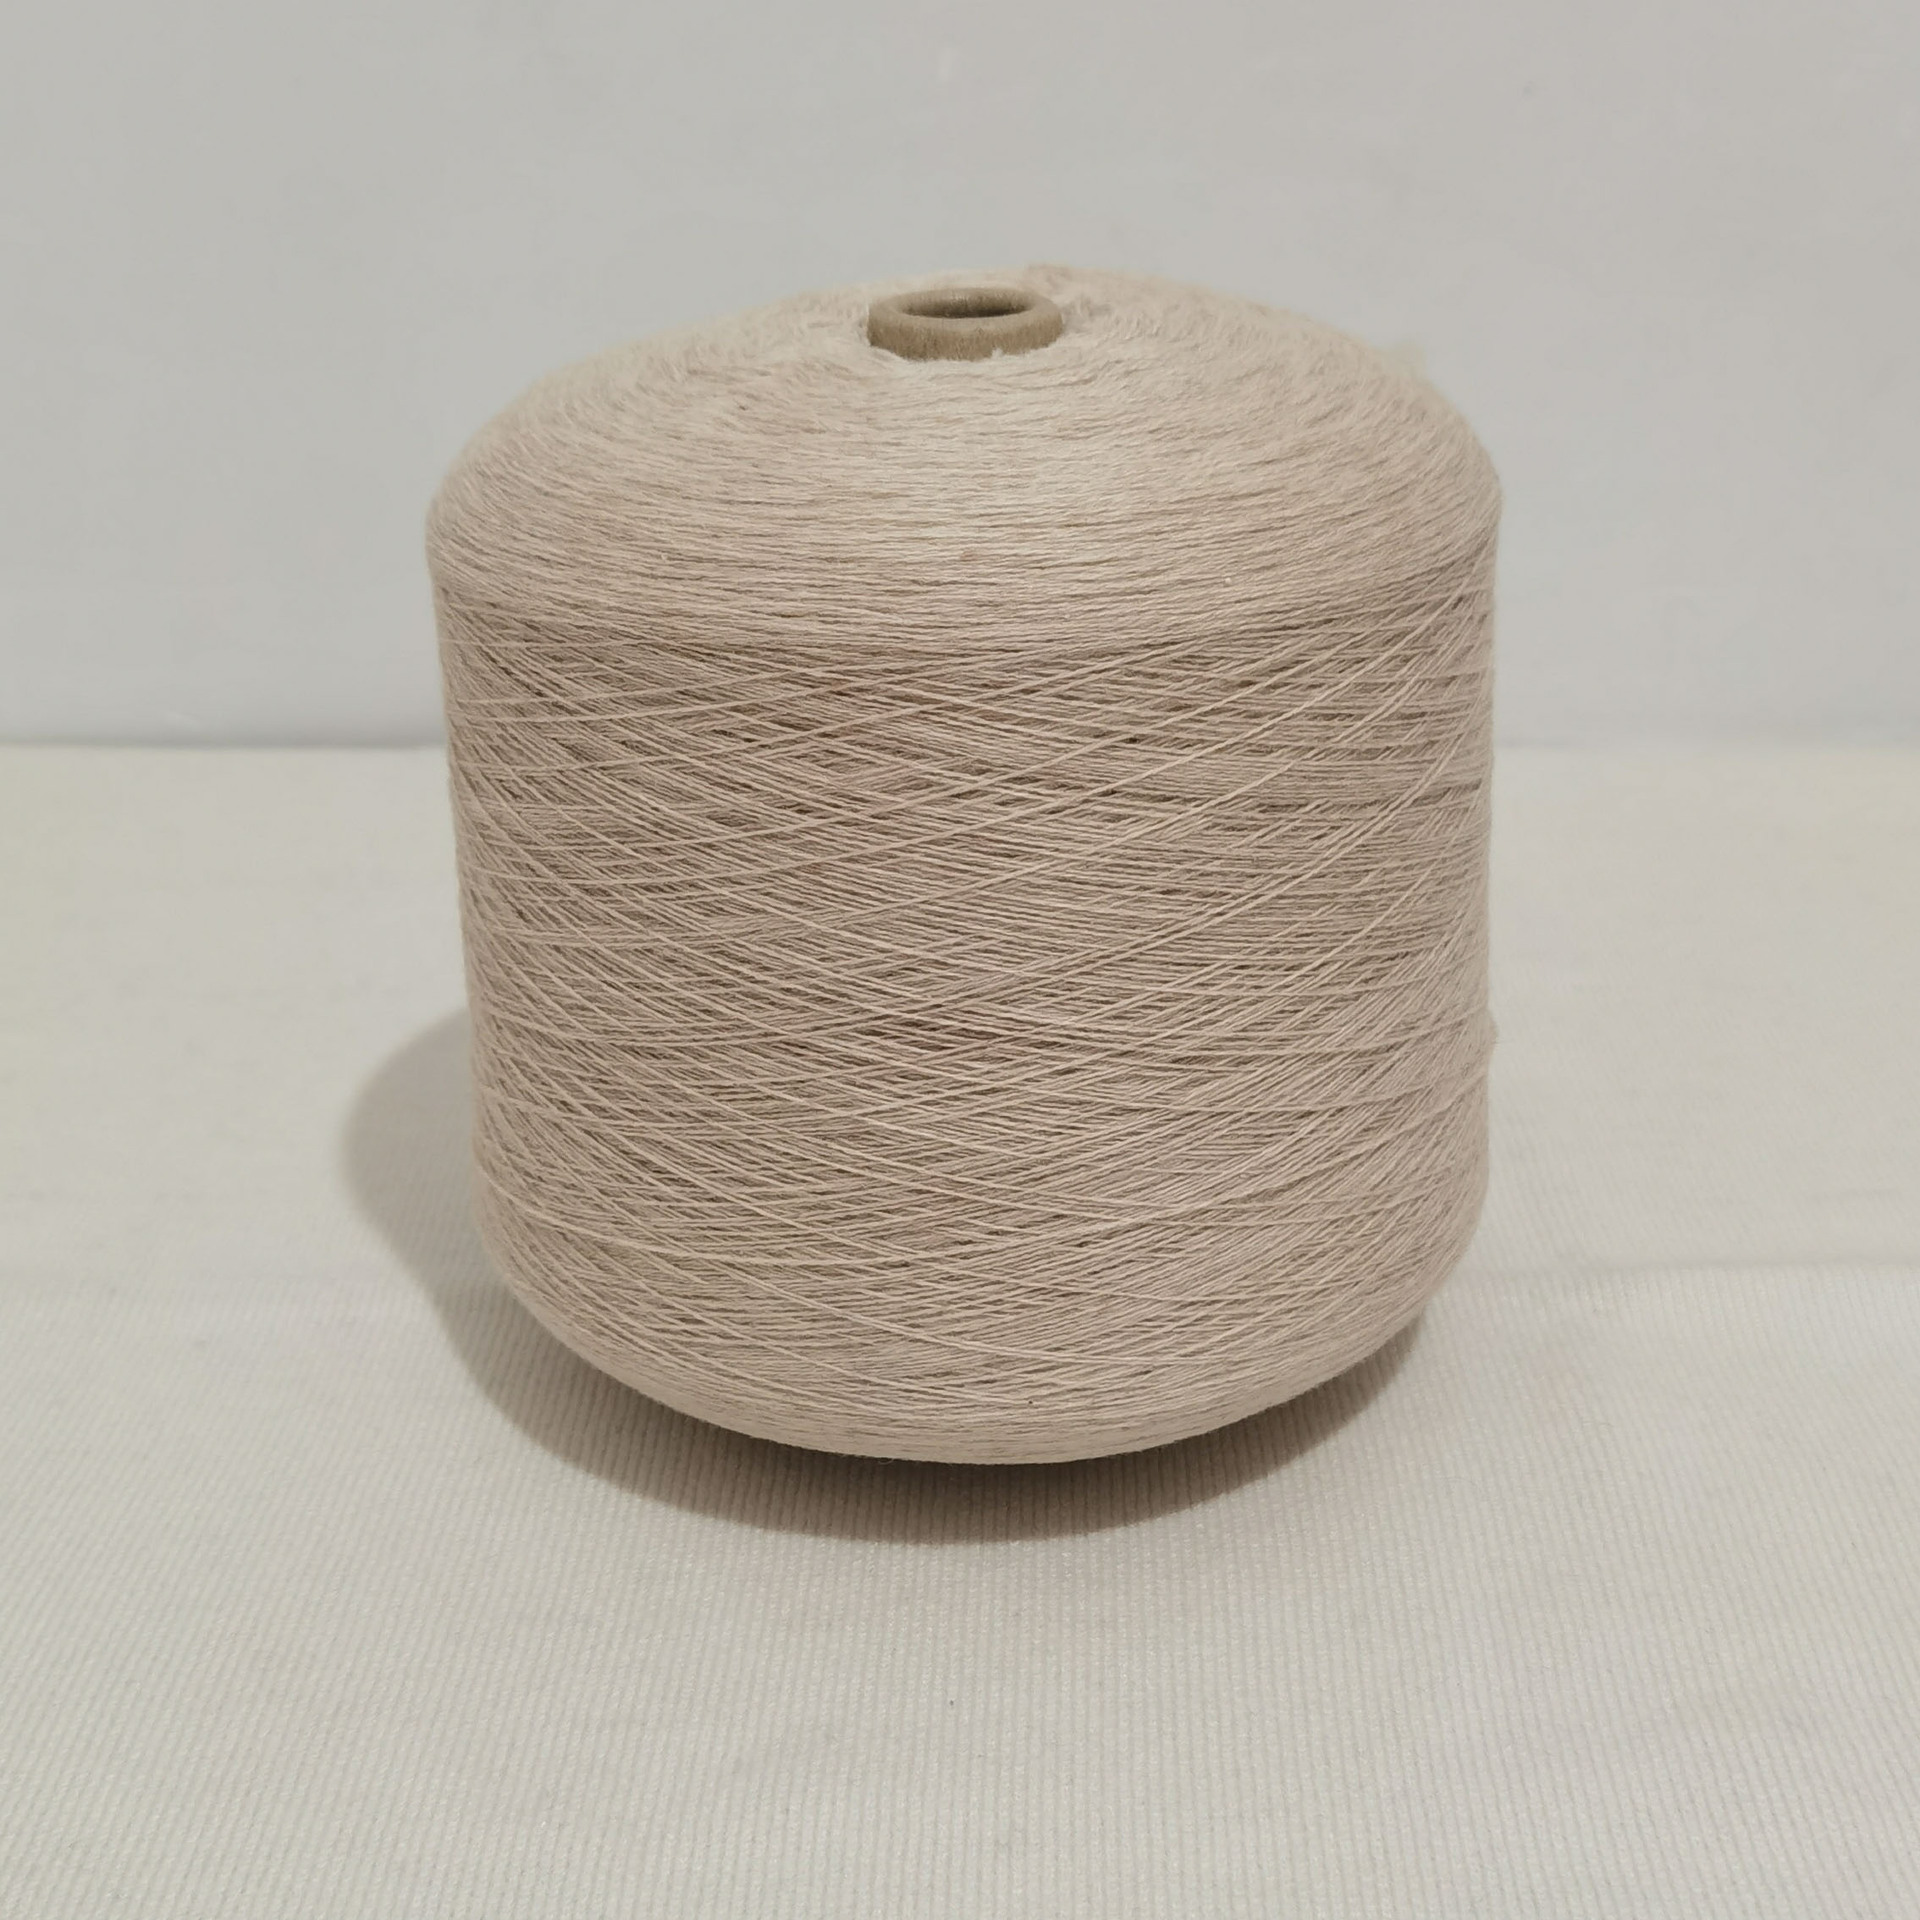 2023 Brand New Color Pure Cashmere Yarn 26 Pieces Hongyuan Woven Hand-Knitted Hand Knitting Yarn Soft and Comfortable Close-Fitting Wear